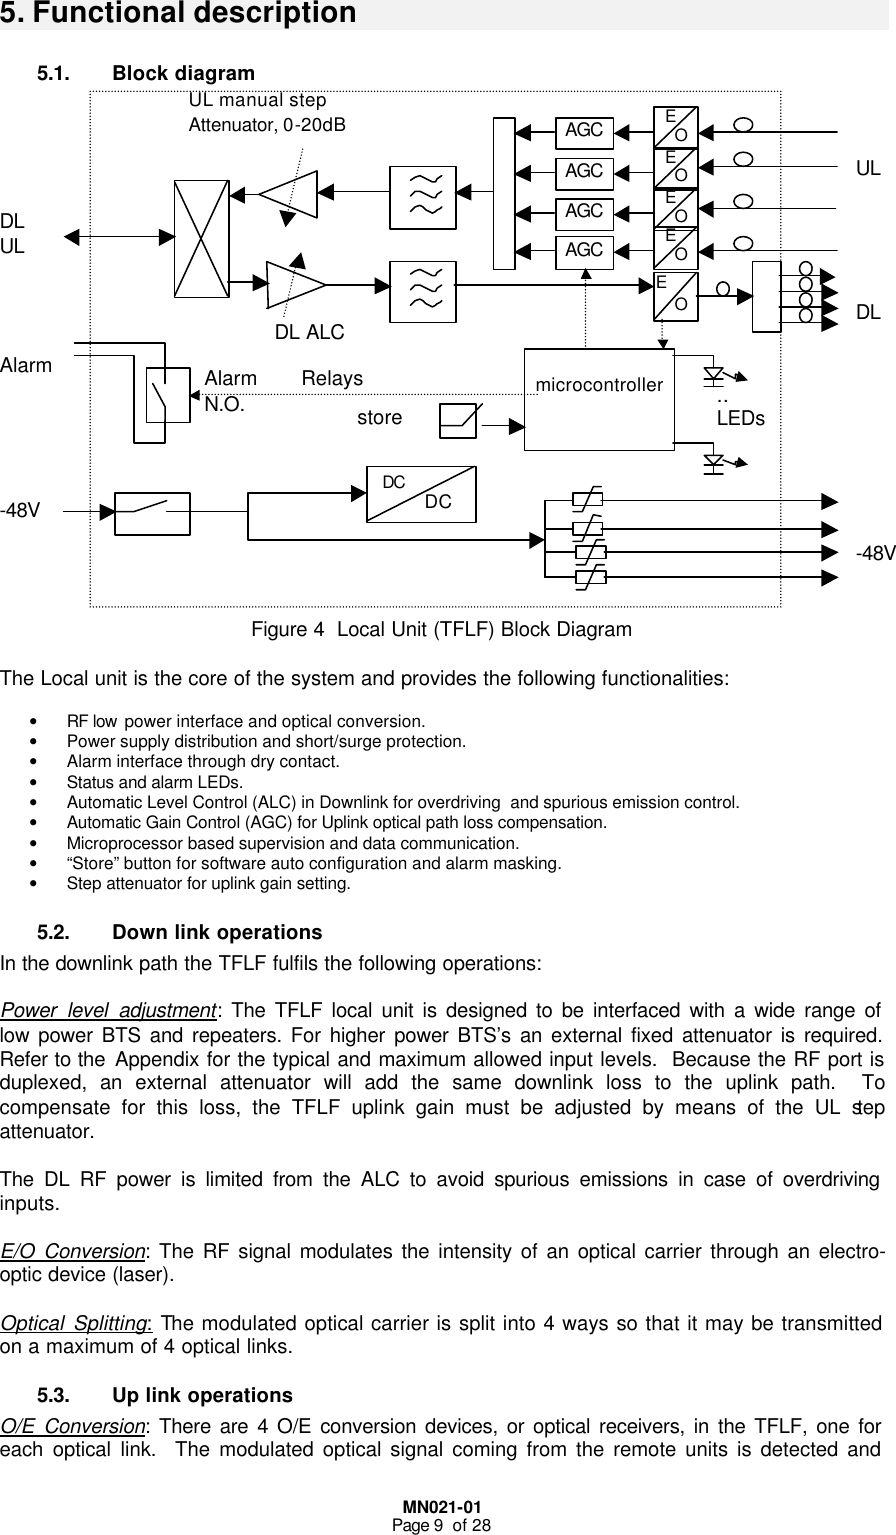  MN021-01 Page 9  of 28  5. Functional description 5.1. Block diagram                       Figure 4  Local Unit (TFLF) Block Diagram  The Local unit is the core of the system and provides the following functionalities:  • RF low  power interface and optical conversion. • Power supply distribution and short/surge protection. • Alarm interface through dry contact. • Status and alarm LEDs. • Automatic Level Control (ALC) in Downlink for overdriving  and spurious emission control. • Automatic Gain Control (AGC) for Uplink optical path loss compensation. • Microprocessor based supervision and data communication. • “Store” button for software auto configuration and alarm masking. • Step attenuator for uplink gain setting. 5.2. Down link operations In the downlink path the TFLF fulfils the following operations:  Power level adjustment: The TFLF local unit is designed to be interfaced with a wide range of low power BTS and repeaters. For higher power BTS’s an external fixed attenuator is required. Refer to the Appendix for the typical and maximum allowed input levels.  Because the RF port is duplexed, an external attenuator will add the same downlink loss to the uplink path.  To compensate for this loss, the TFLF uplink gain must be adjusted by means of the UL step attenuator.  The DL RF power is limited from the ALC to avoid spurious emissions in case of overdriving inputs.  E/O Conversion: The RF signal modulates the intensity of an optical carrier through an electro-optic device (laser).   Optical Splitting: The modulated optical carrier is split into 4 ways so that it may be transmitted on a maximum of 4 optical links. 5.3. Up link operations O/E Conversion: There are 4 O/E conversion devices, or optical receivers, in the TFLF, one for each optical link.  The modulated optical signal coming from the remote units is detected and E     O   E     O   AGC   E     O   AGC   E     O   AGC   E     O   AGC UL manual step  Attenuator, 0-20dB  DL ALC UL      DL          -48V    DL UL     Alarm      -48V DC               DC   microcontroller .. LEDs … Alarm Relays N.O. store 